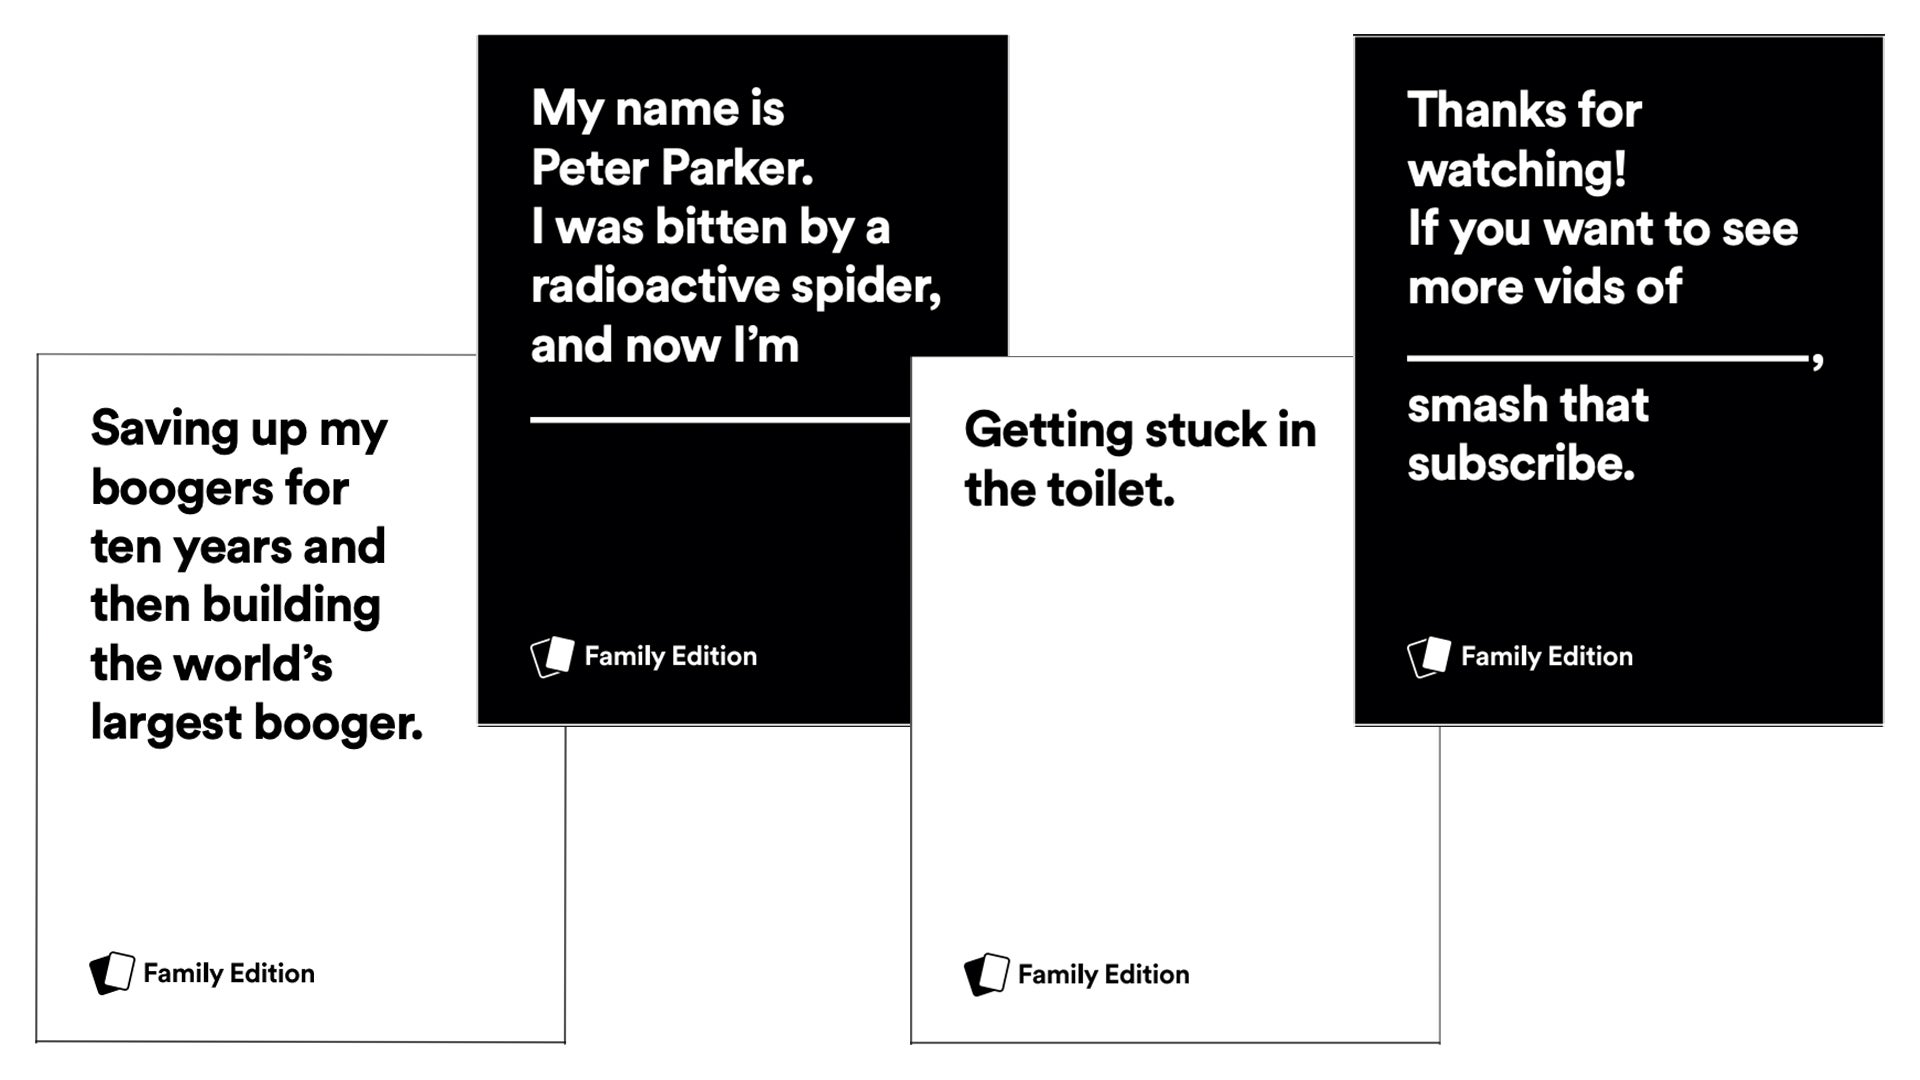 Cards against humanity pc download you video download